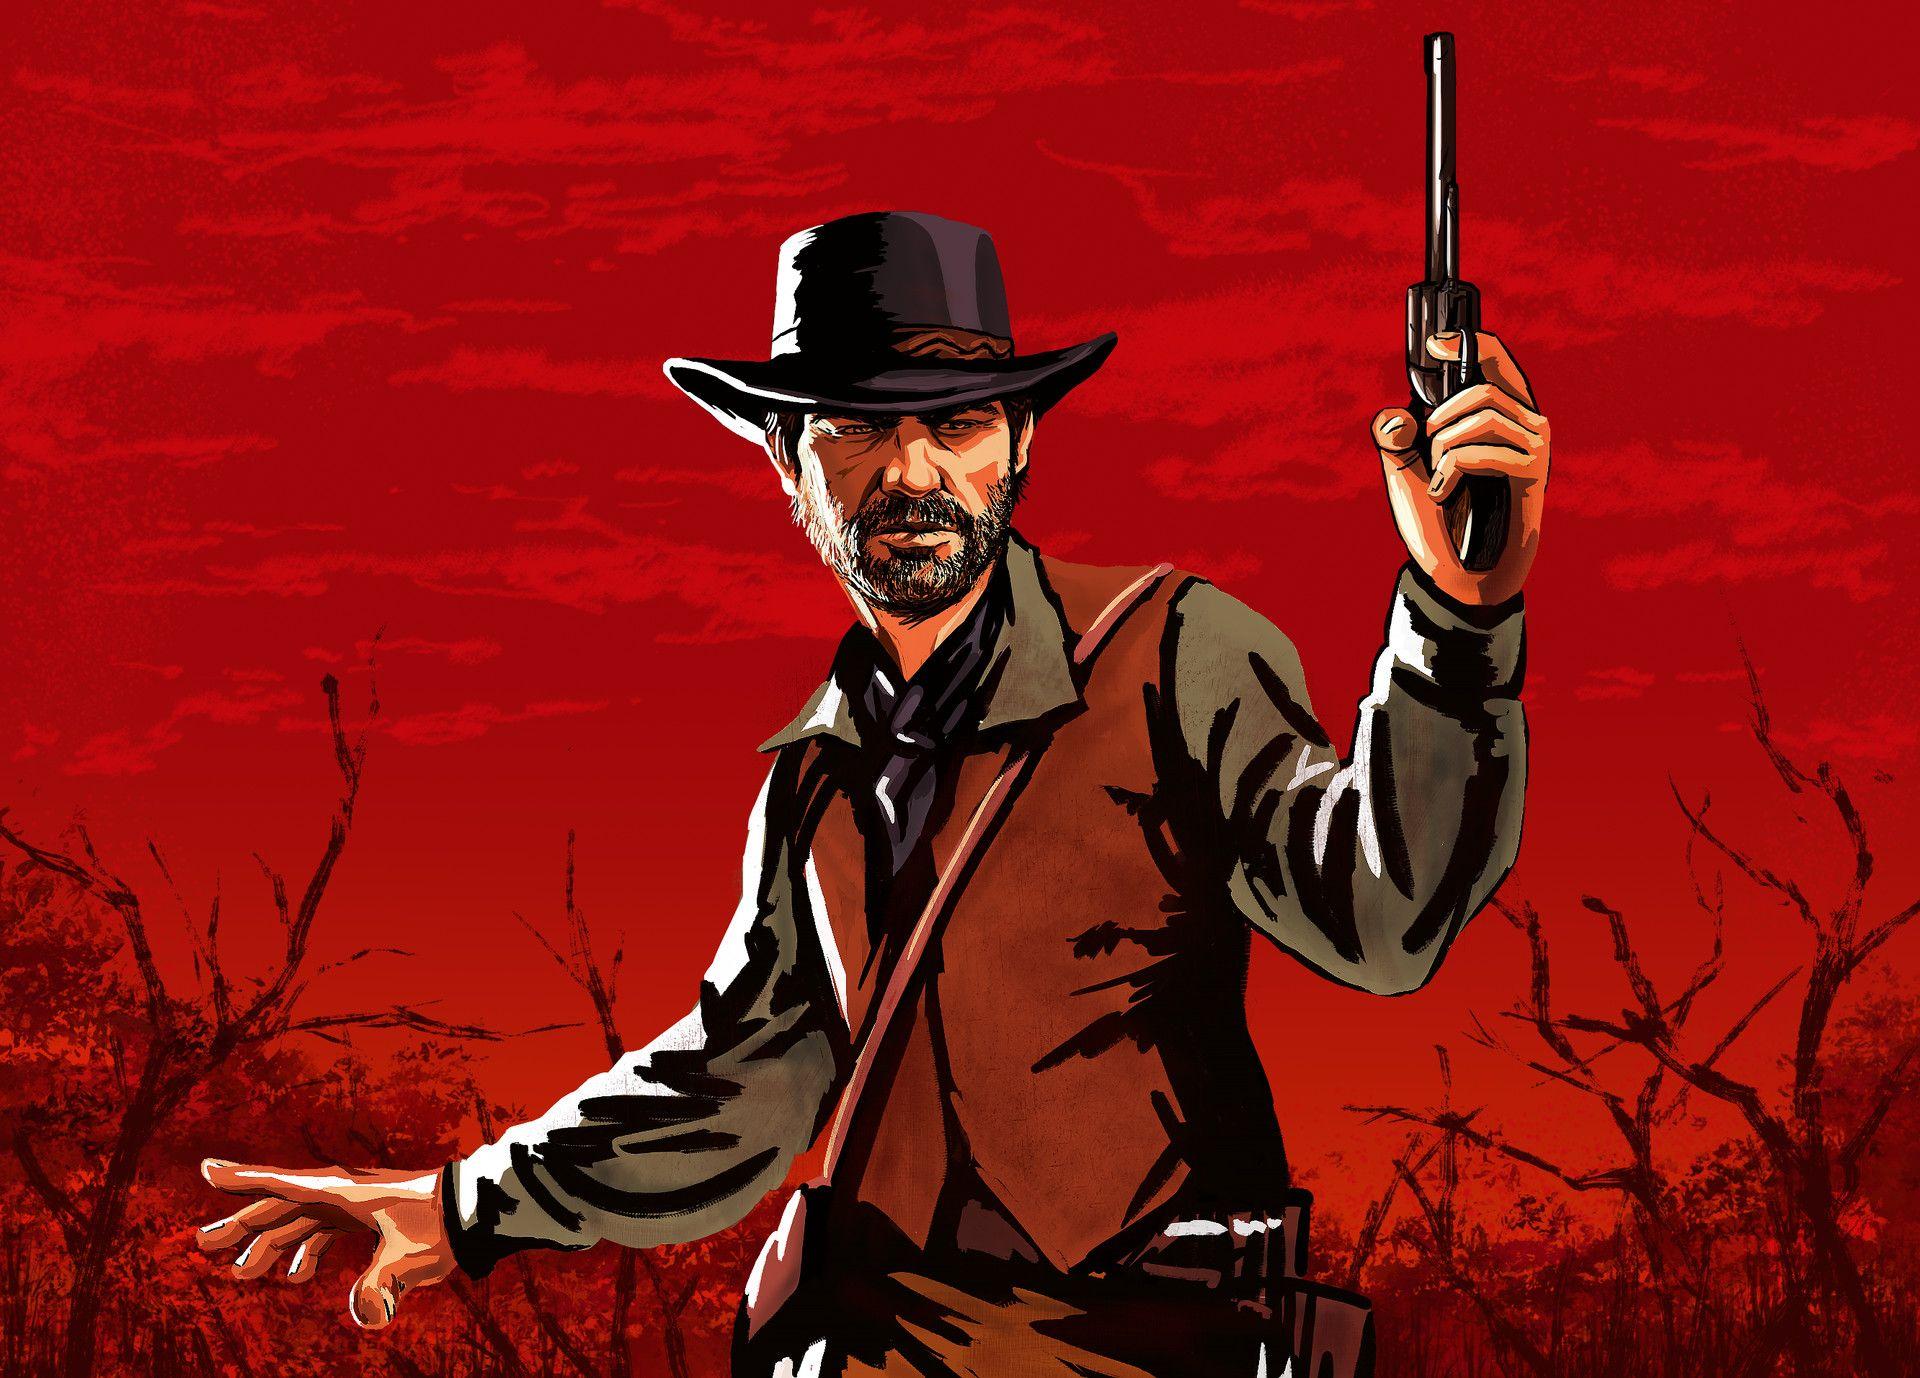 Wallpaper ID 399027  Video Game Red Dead Redemption 2 Phone Wallpaper  Arthur Morgan 1080x1920 free download